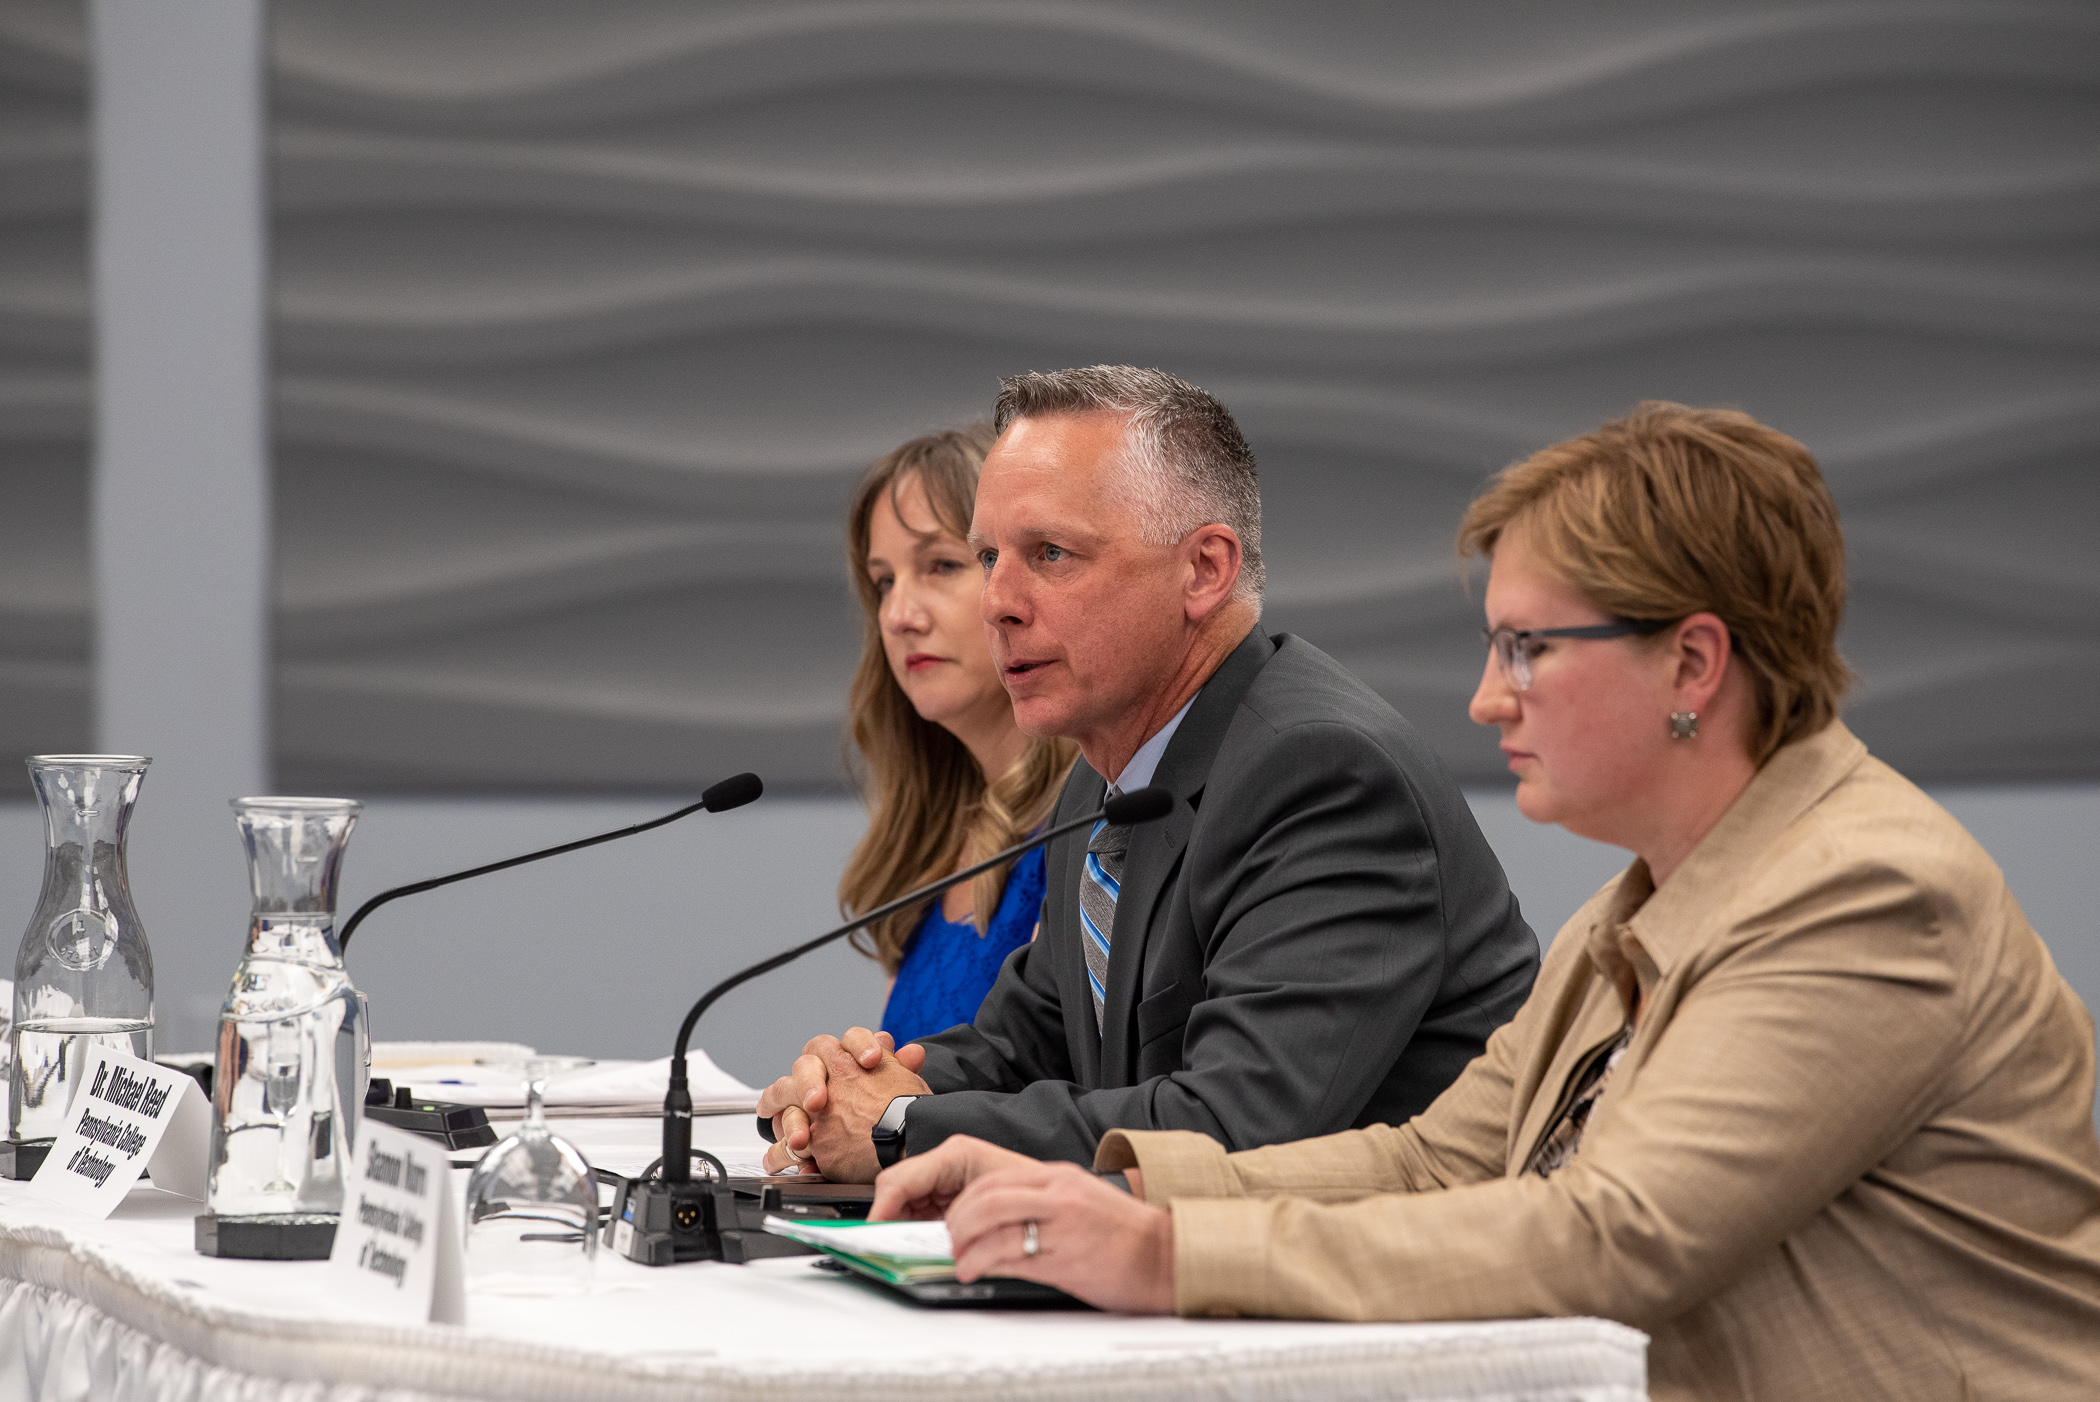 Region's workforce challenges discussed at on-campus hearing